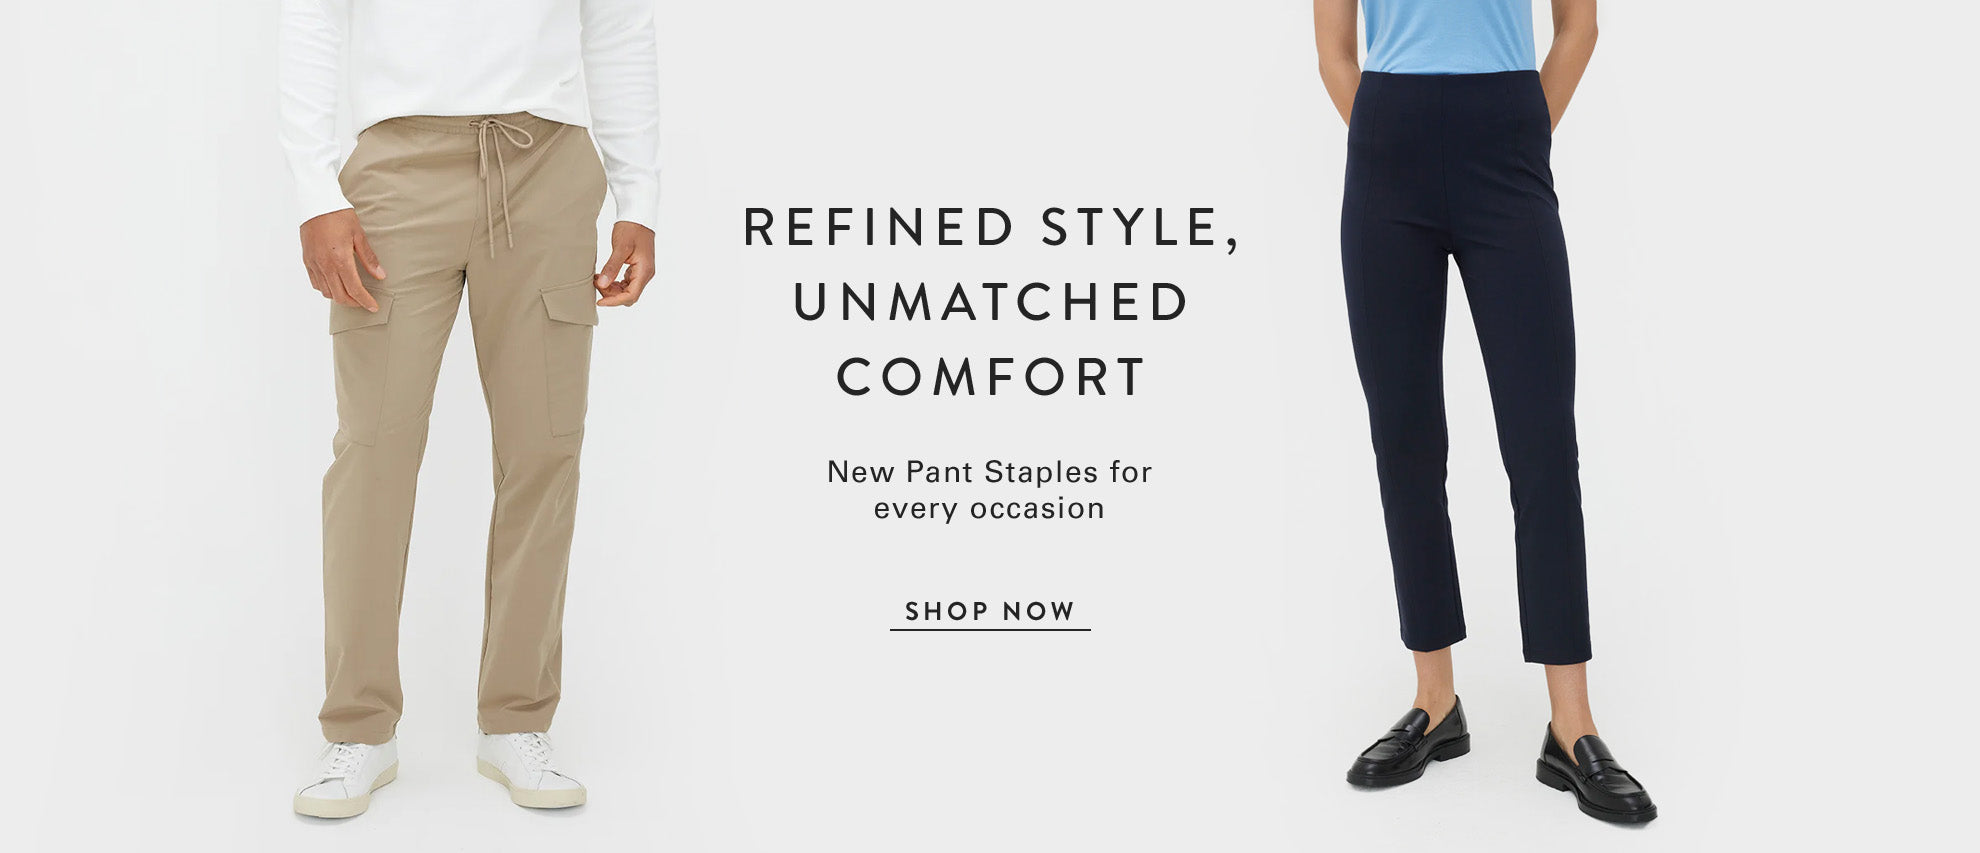 Kit and Ace: Smart, Easy to Love, Made to Last Apparel for Men & Women